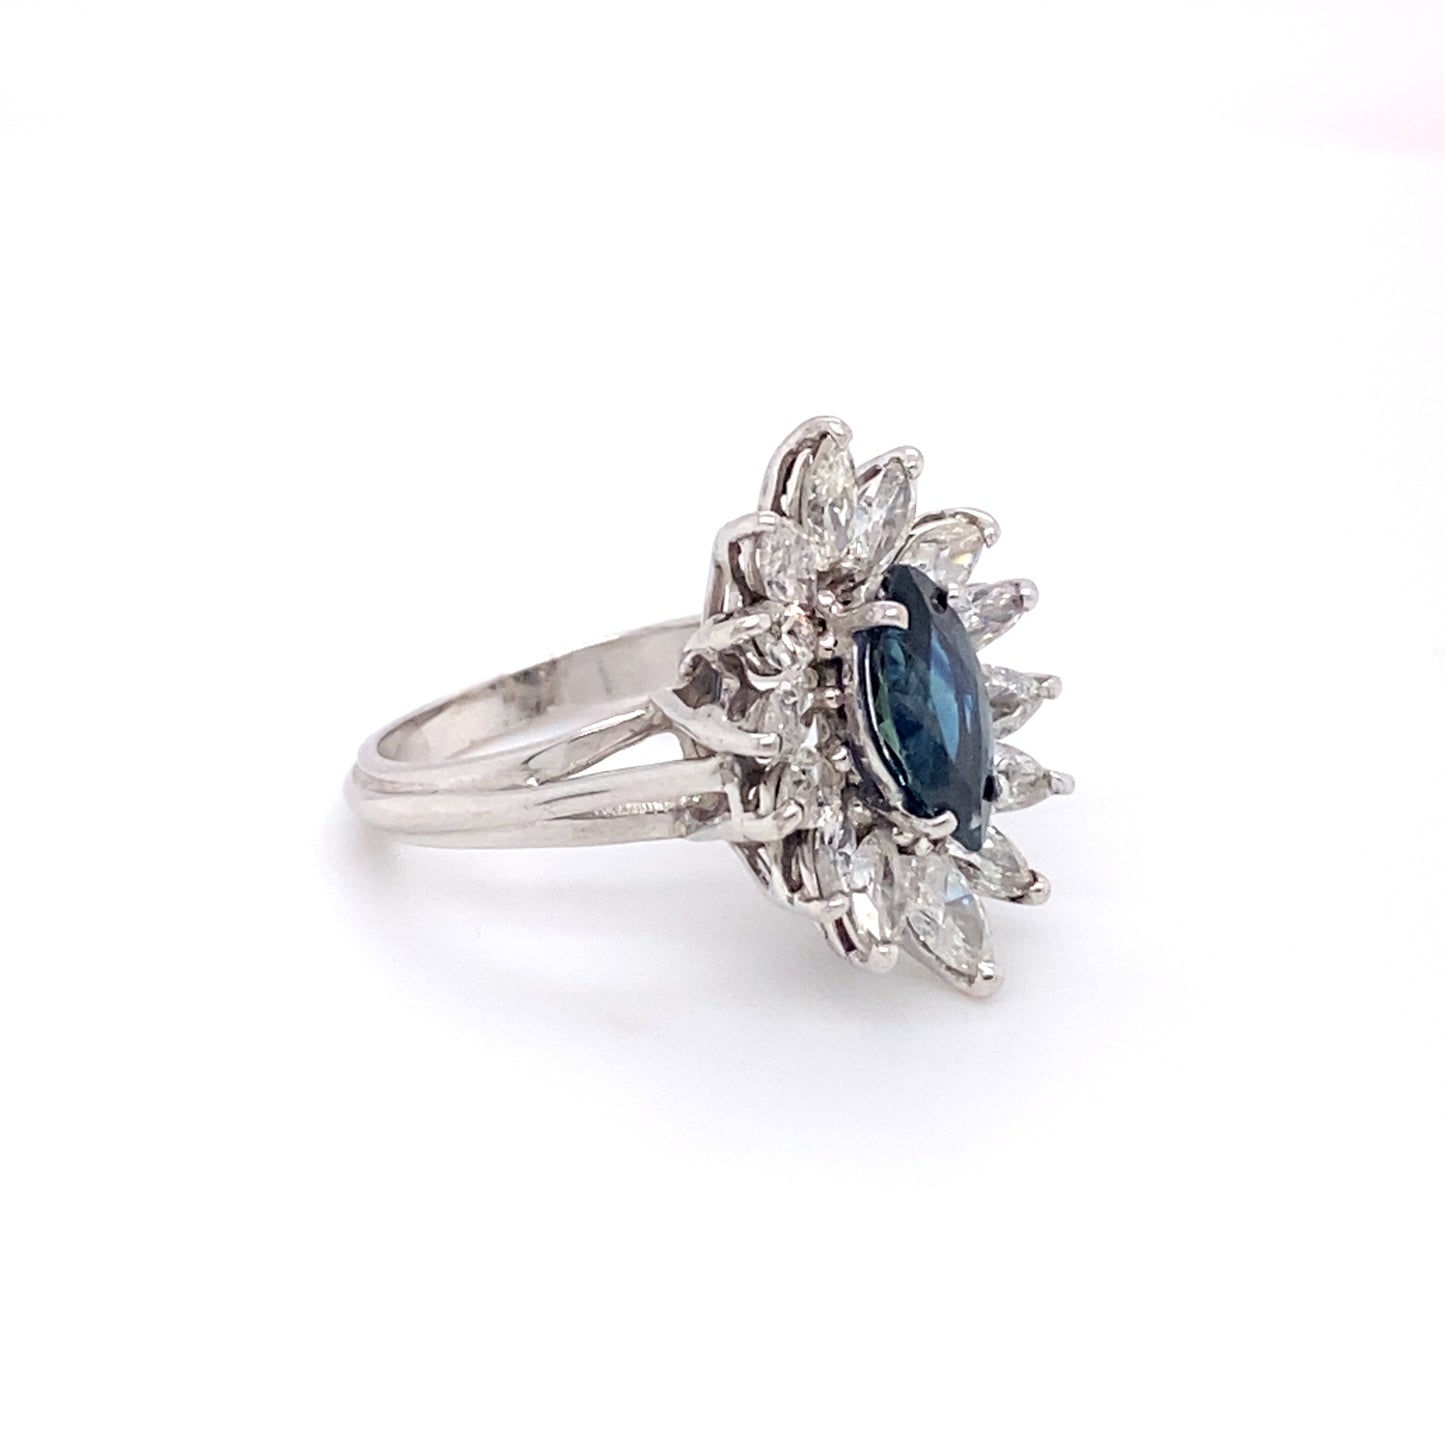 1950s Vintage Marquise Sapphire and Diamond Ring in 18K White Gold